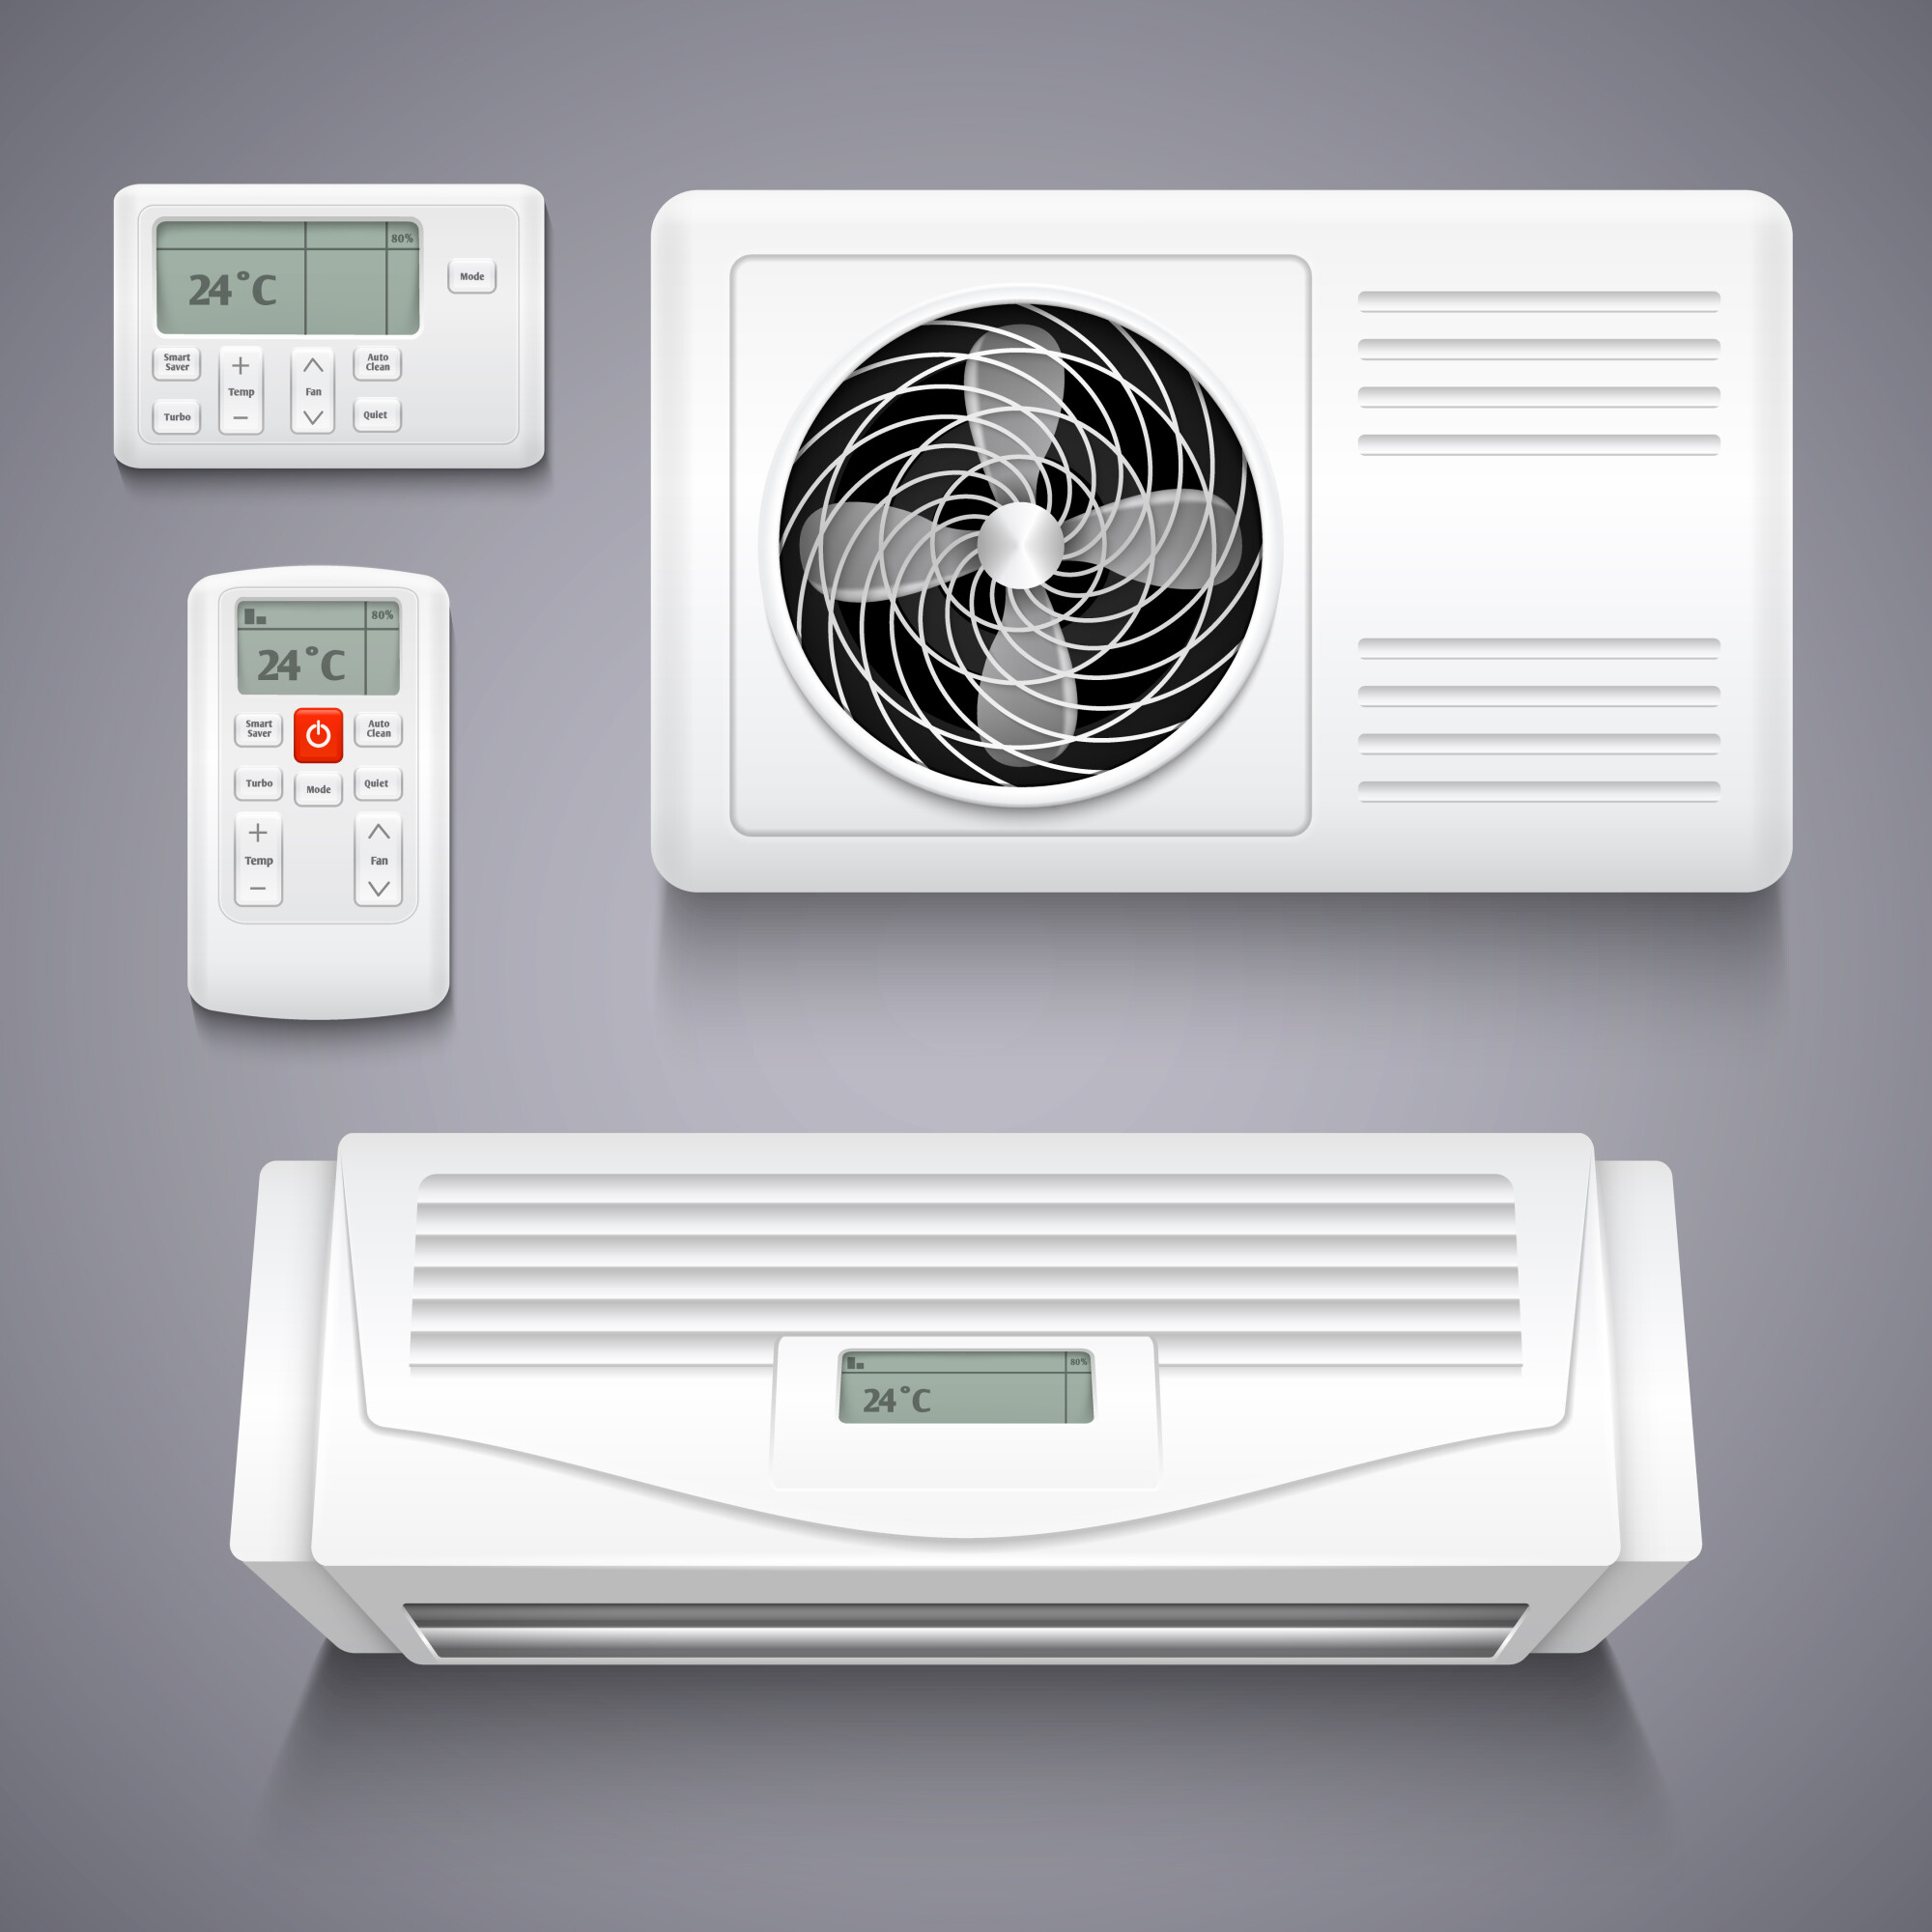 If you need to install a new AC unit in your home, an expert can make it easier. Here are reasons to hire an AC installation service in Millbrook, AL.